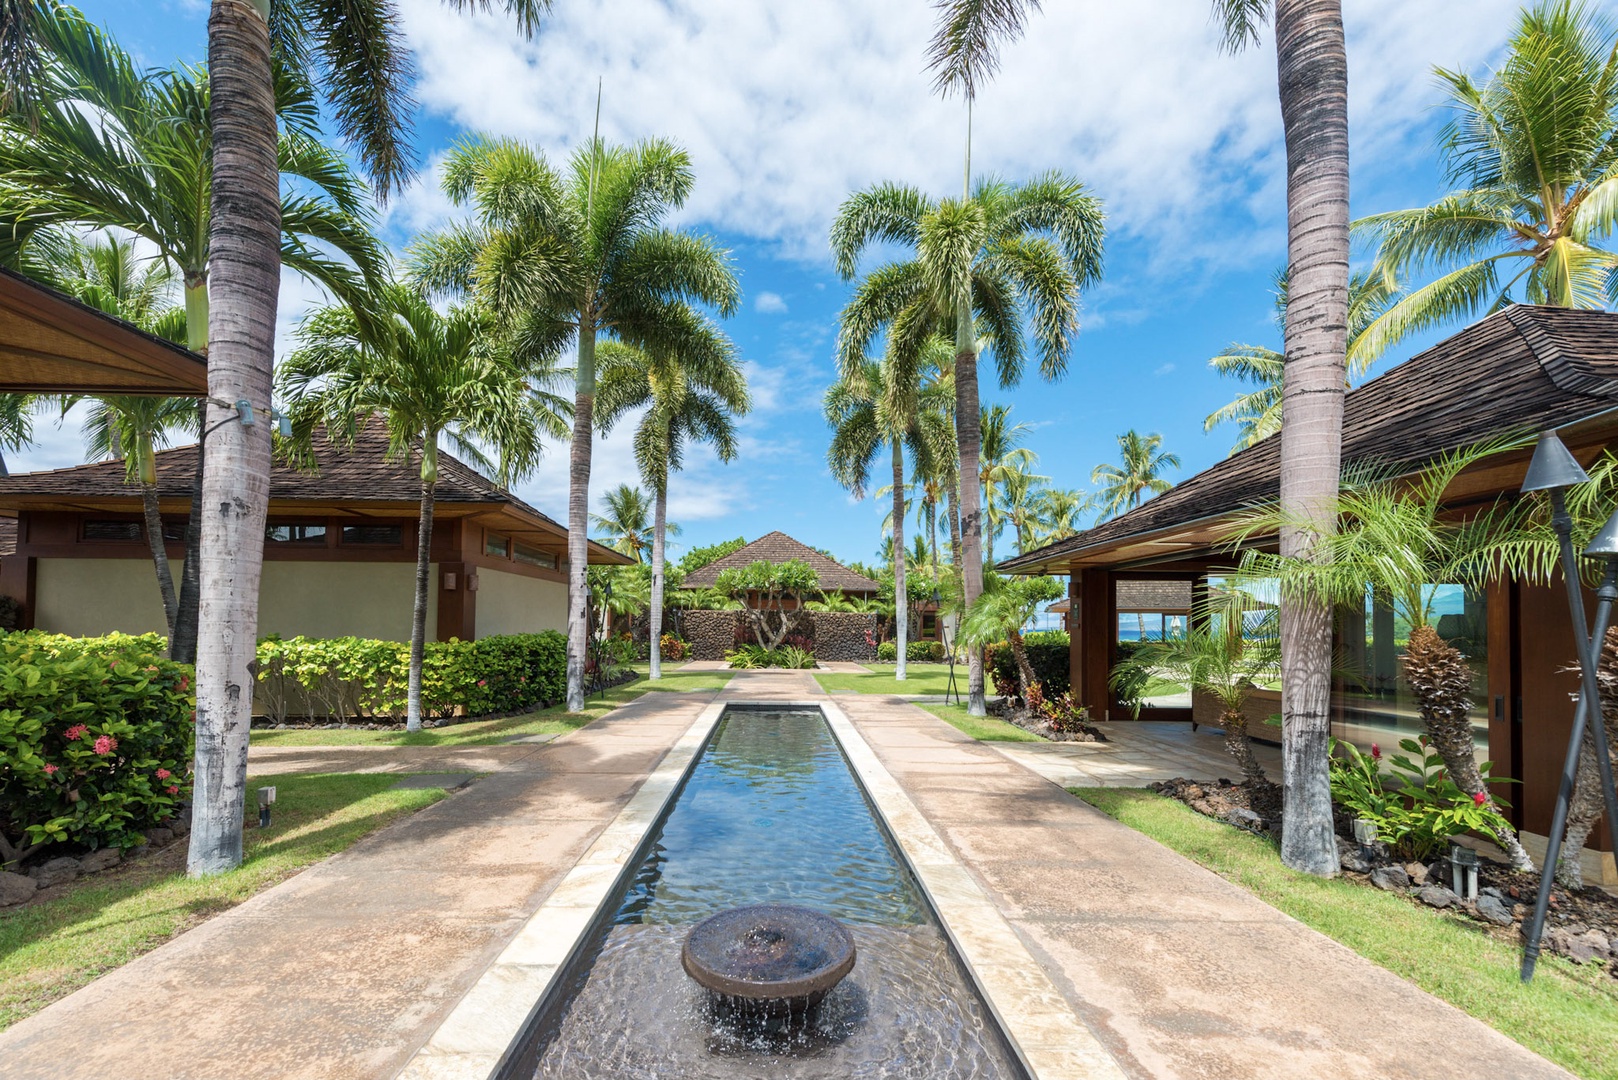 Kamuela Vacation Rentals, 3BD Na Hale 3 at Pauoa Beach Club at Mauna Lani Resort - The path to the Pauoa Beach Club Amenities Center is lined with a welcoming water feature & pristine landscaping